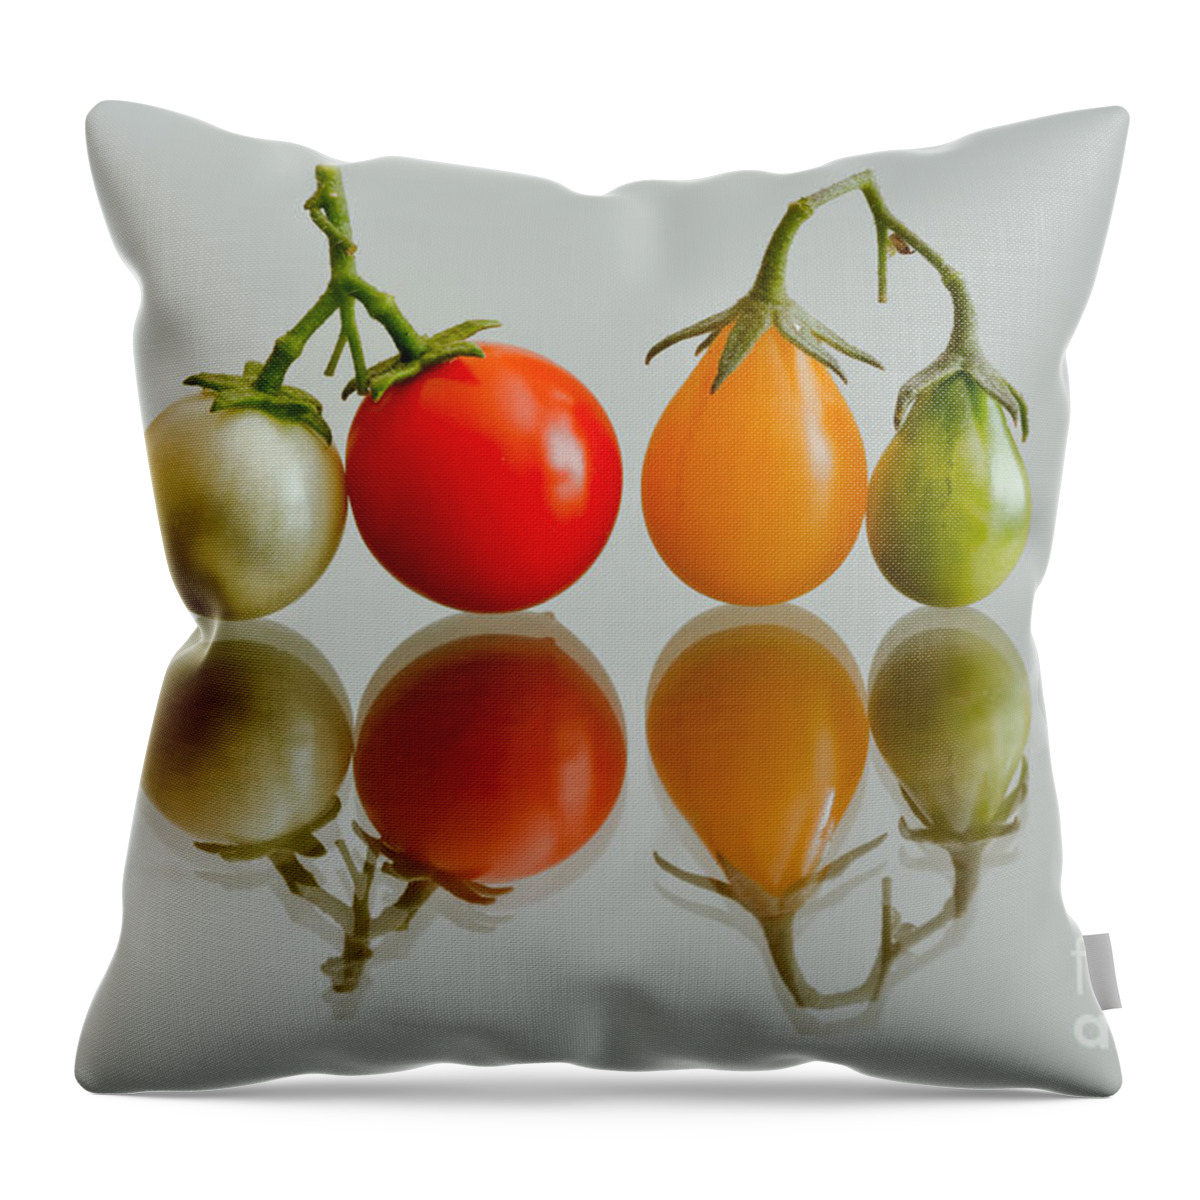 Abstract Throw Pillow featuring the photograph Four of The Kinds by Jonathan Nguyen